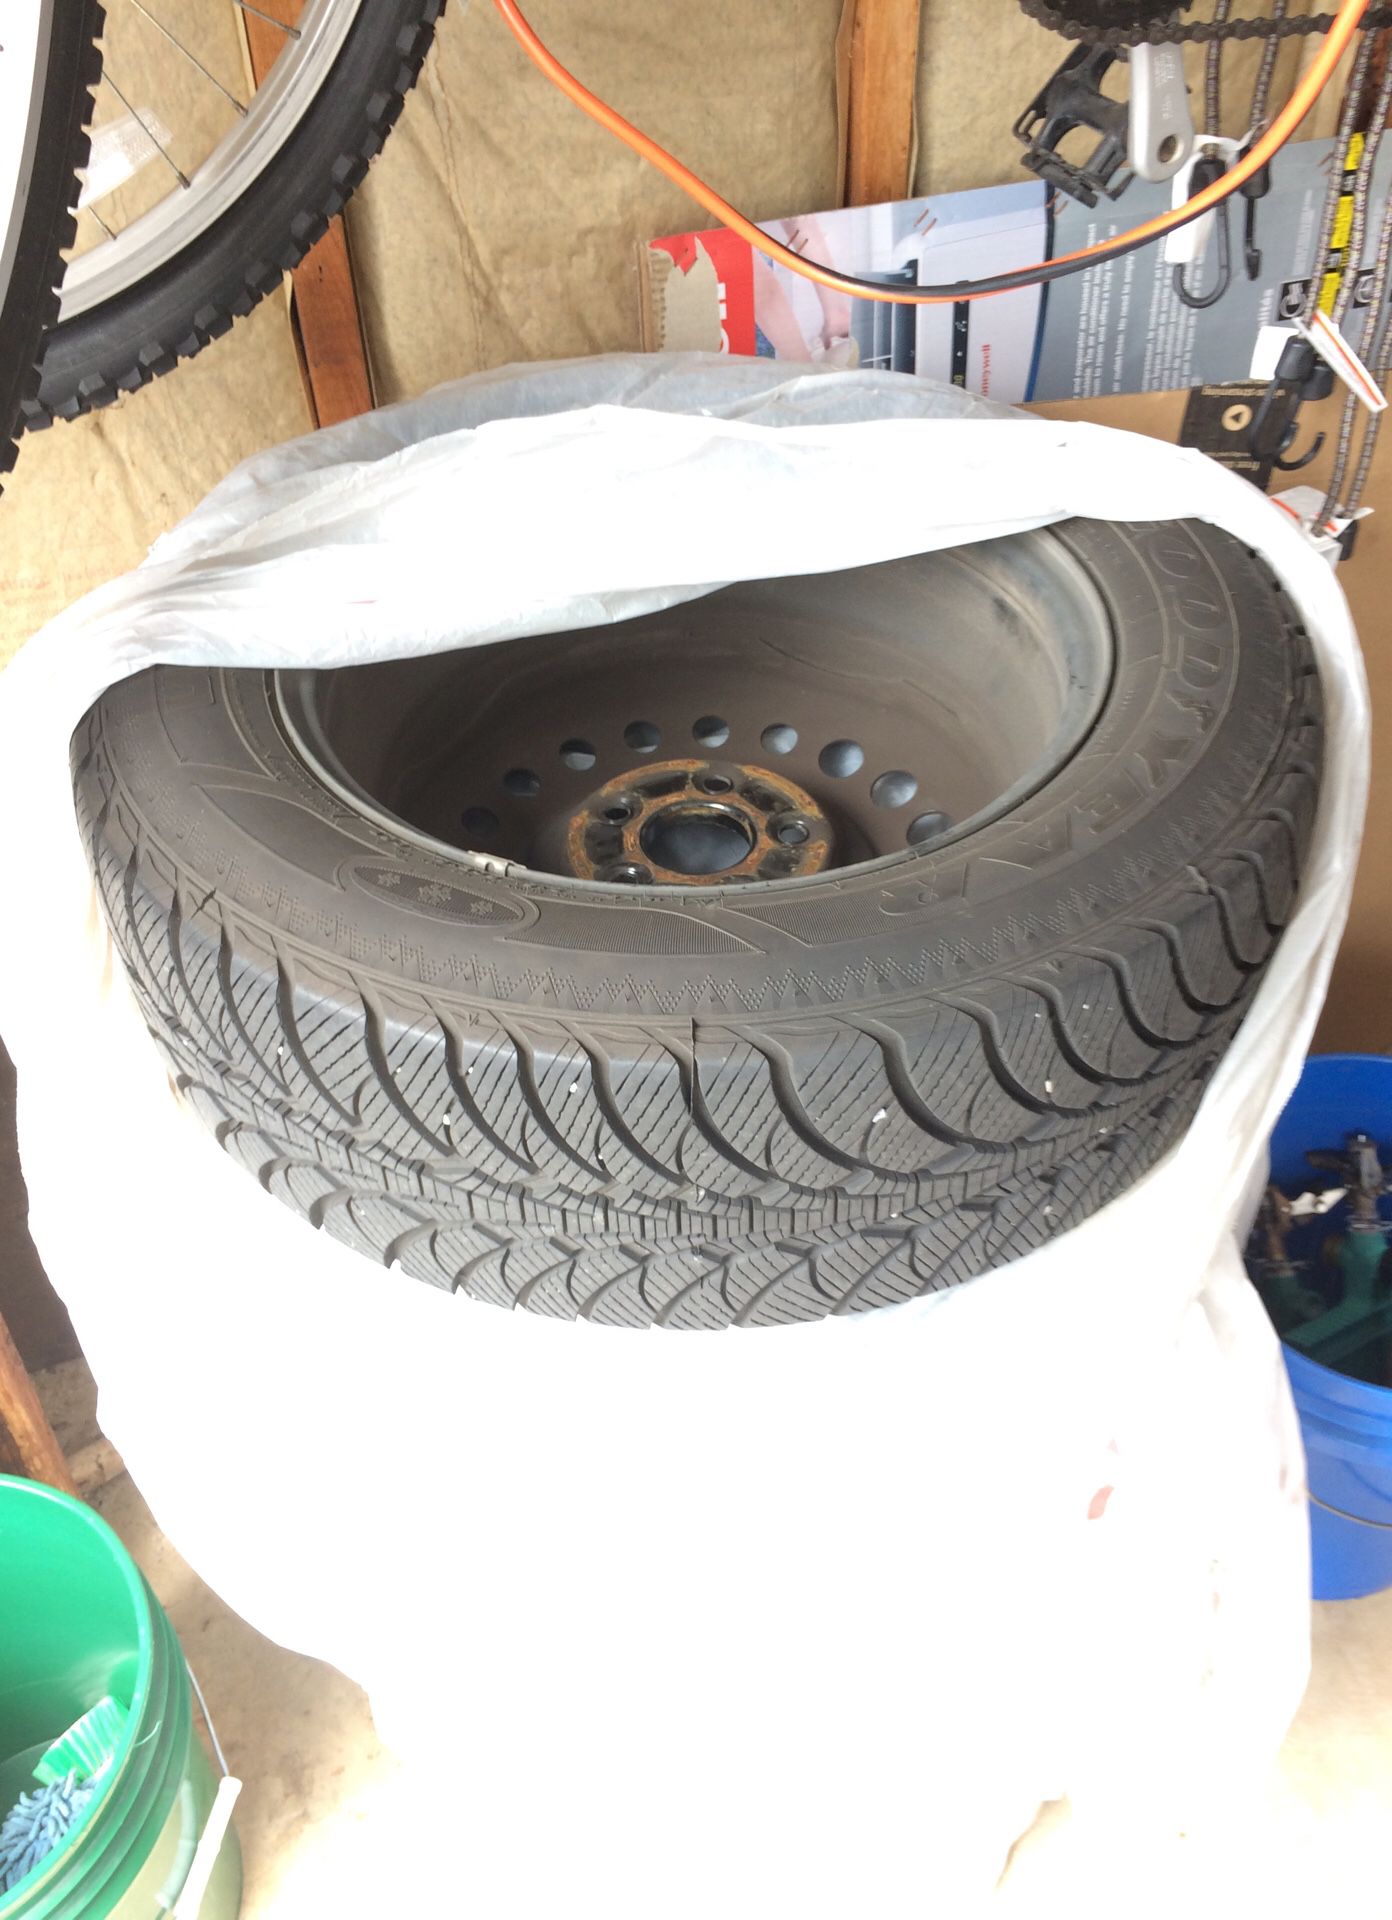 Honda rims and tires Goodyear P215/60/R16 fit 2012 accord and many other Honda